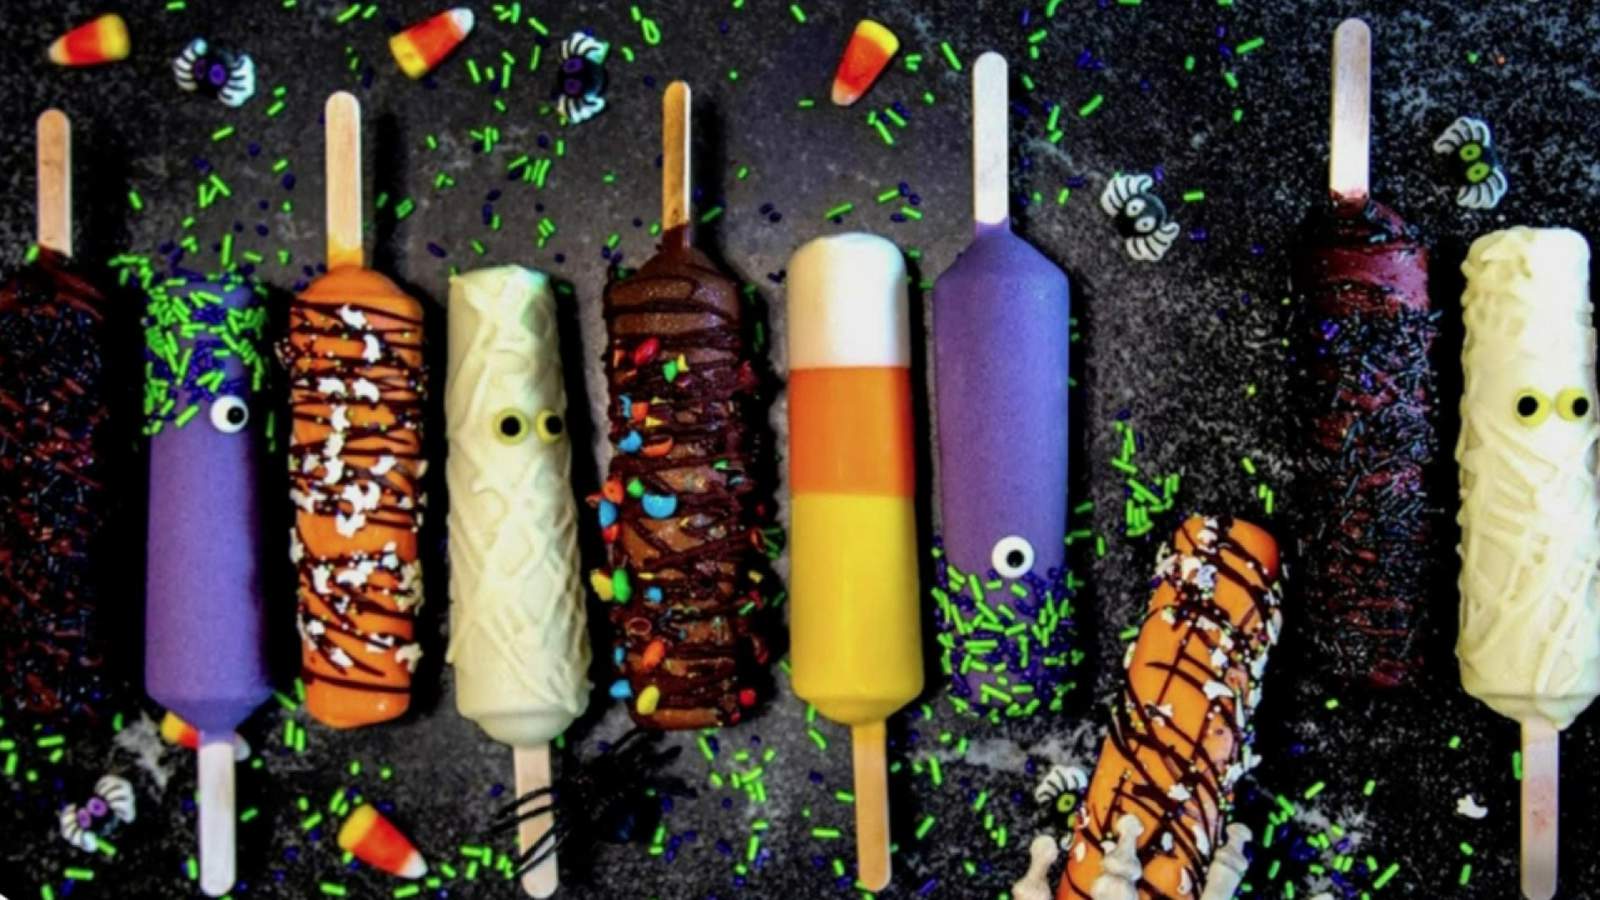 Level up your popsicle game this Halloween